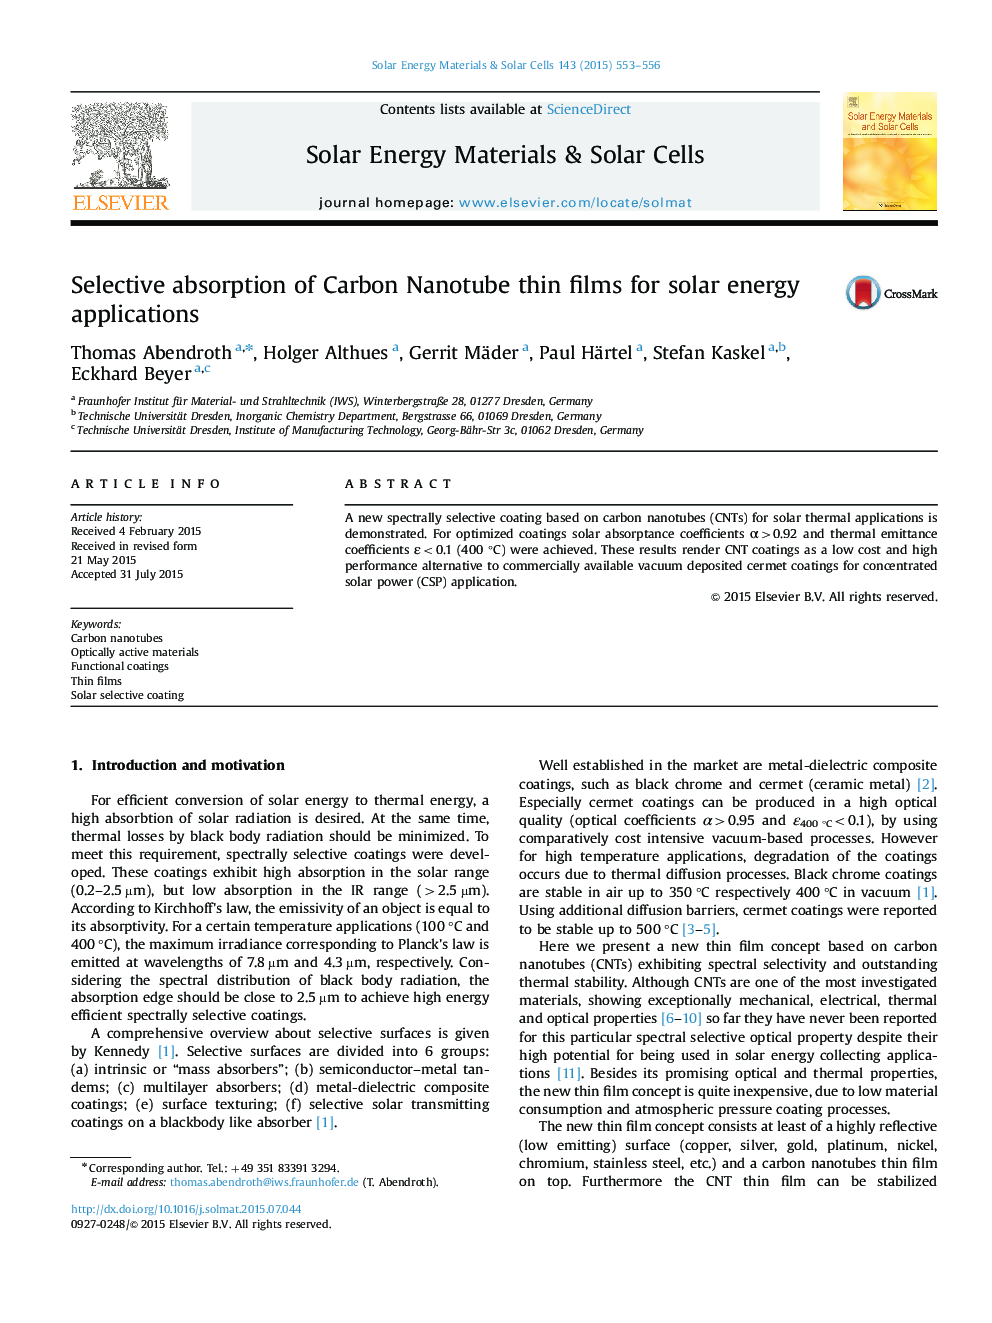 Selective absorption of Carbon Nanotube thin films for solar energy applications